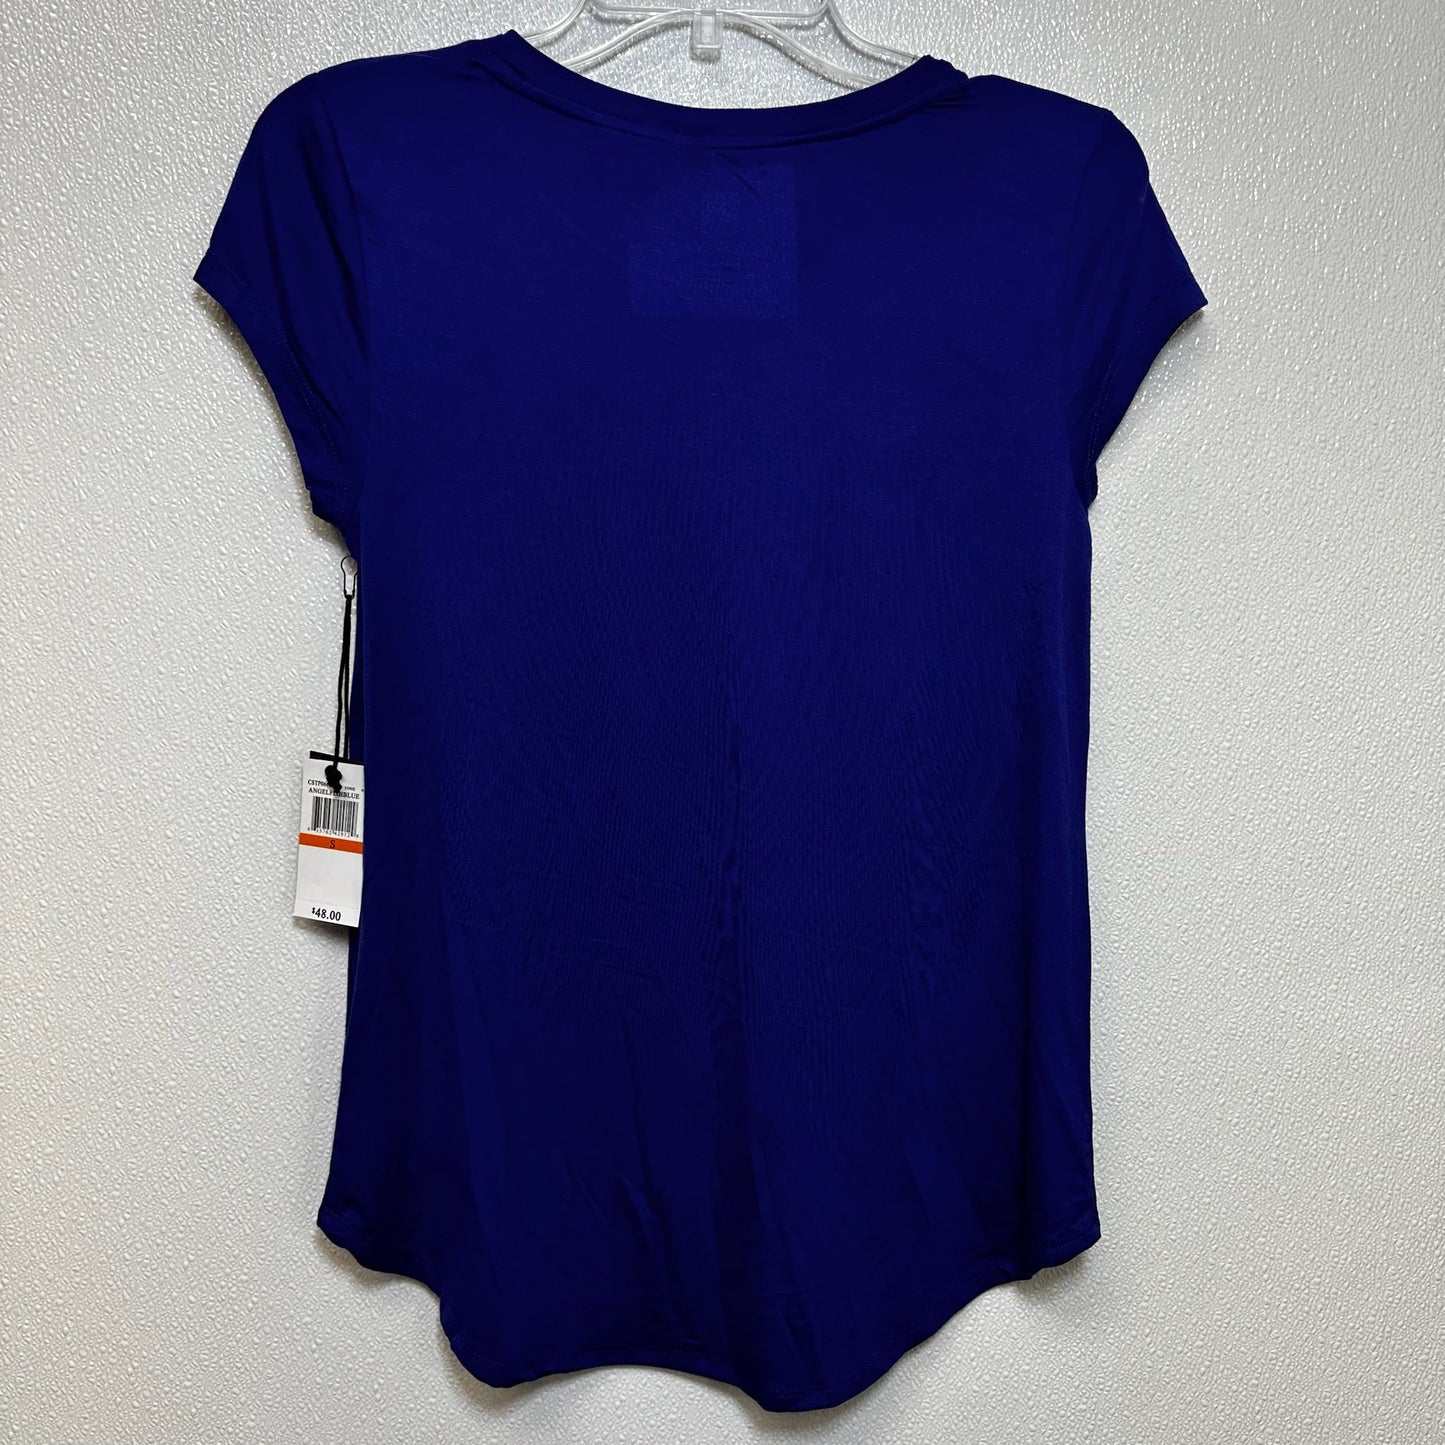 Royal Blue Top Short Sleeve Basic Cable And Gauge, Size S